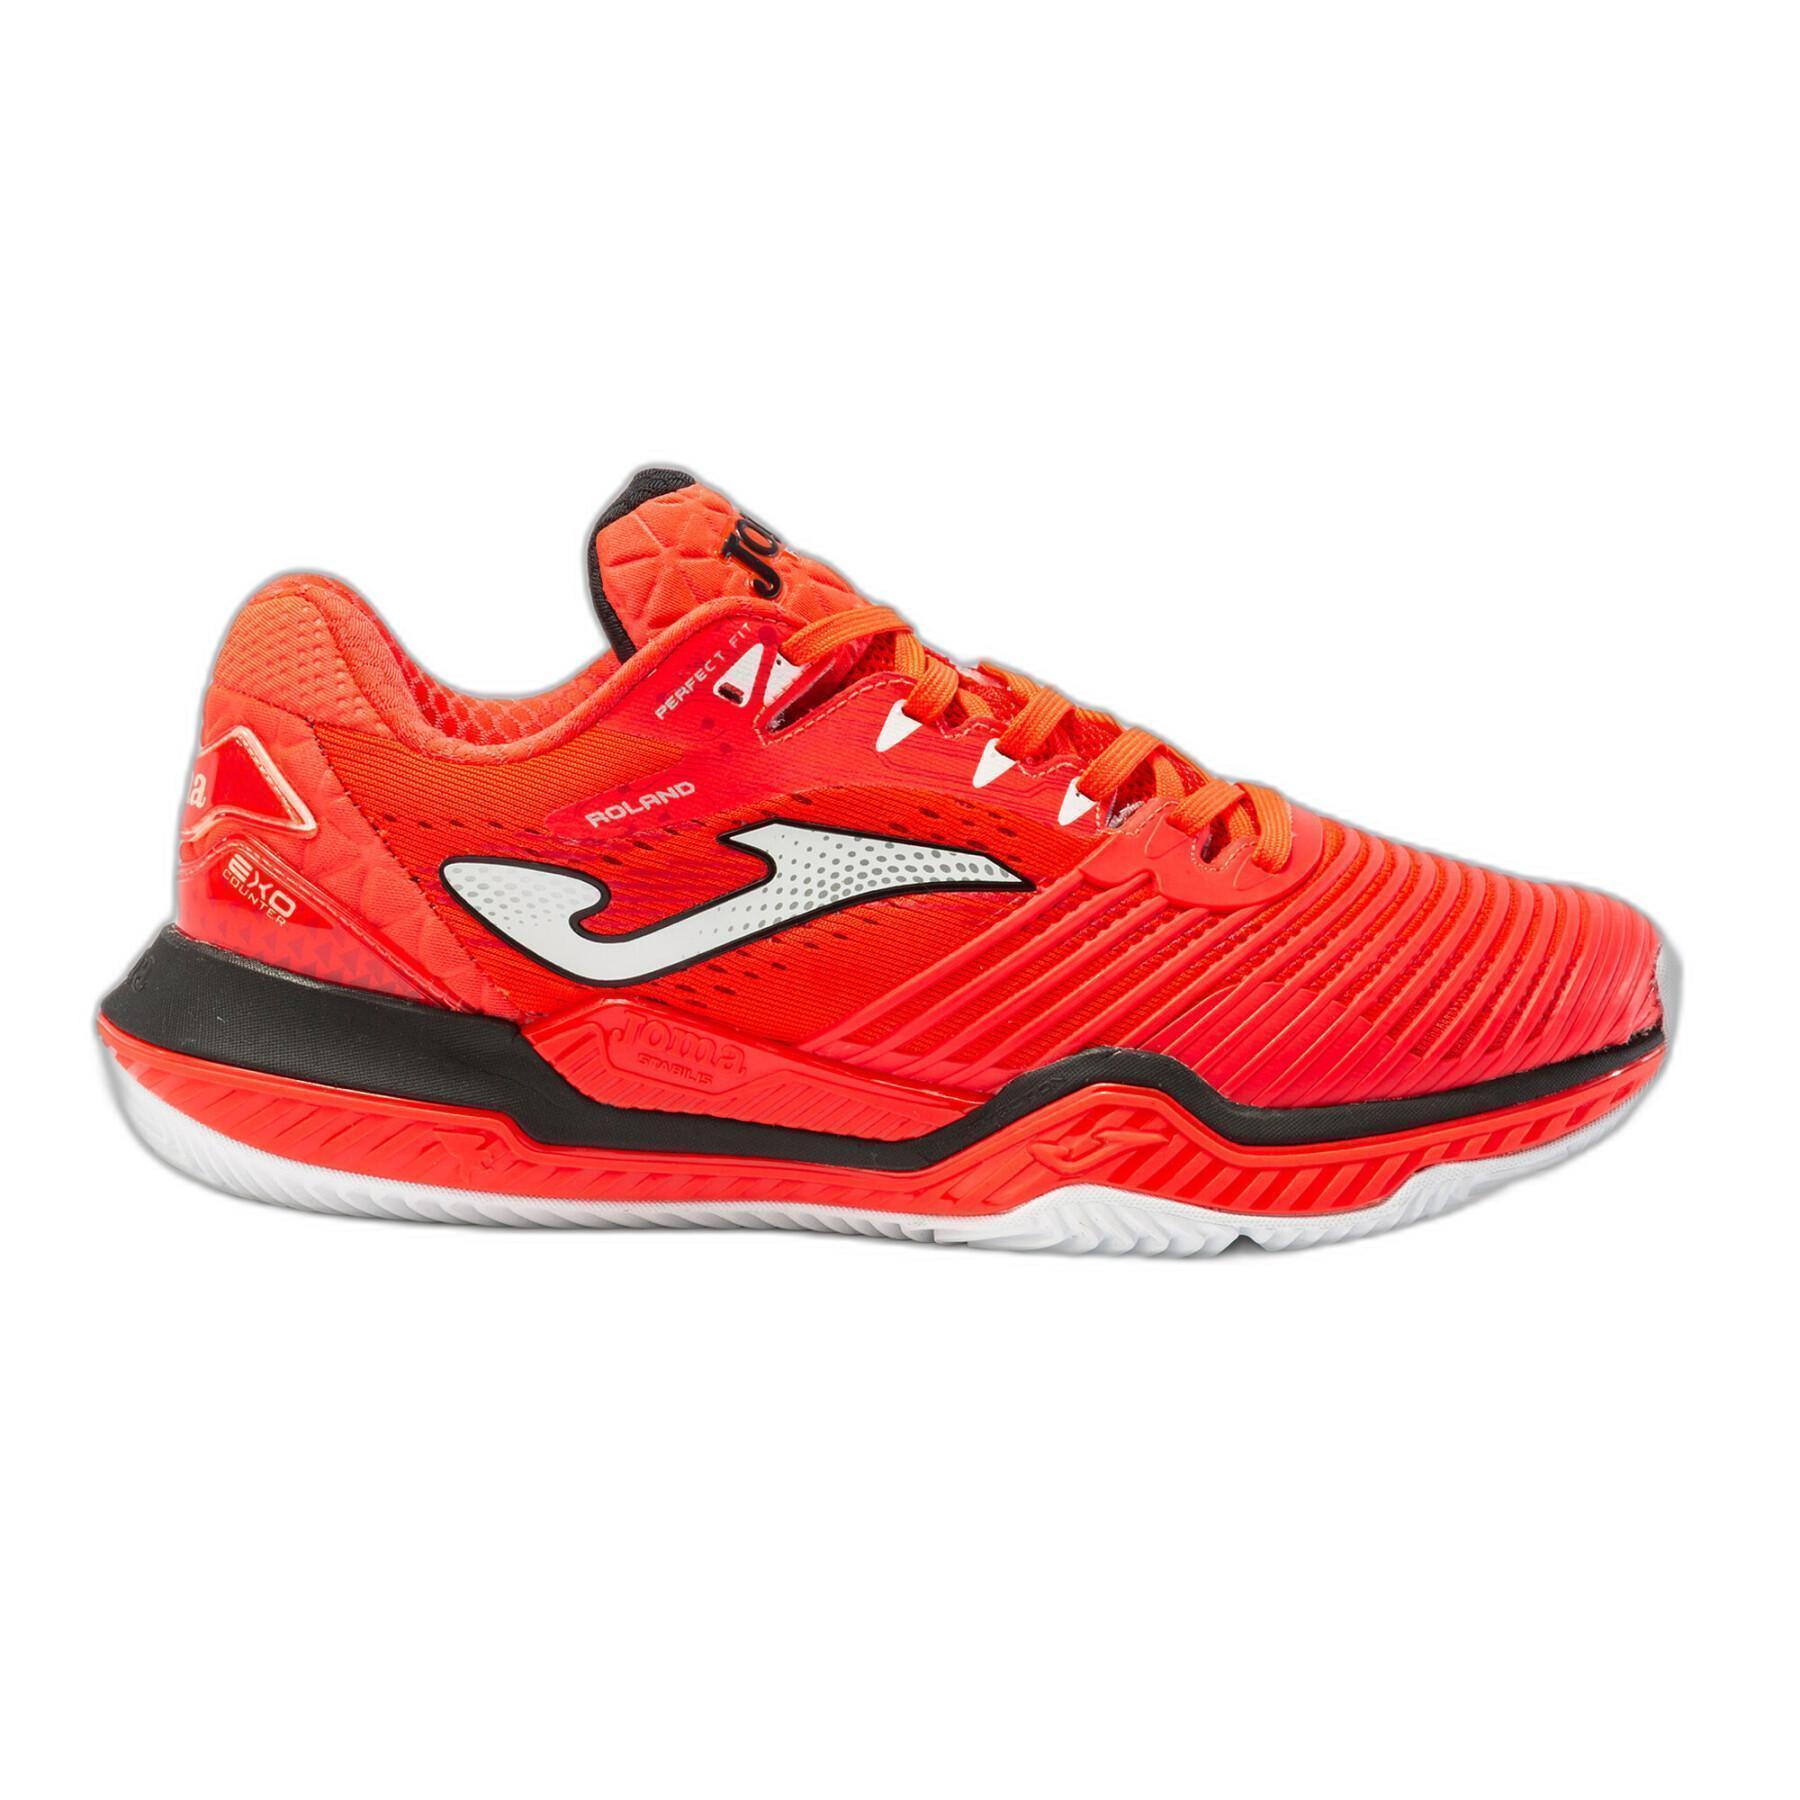 Chaussures de padel Joma T.Point 2207